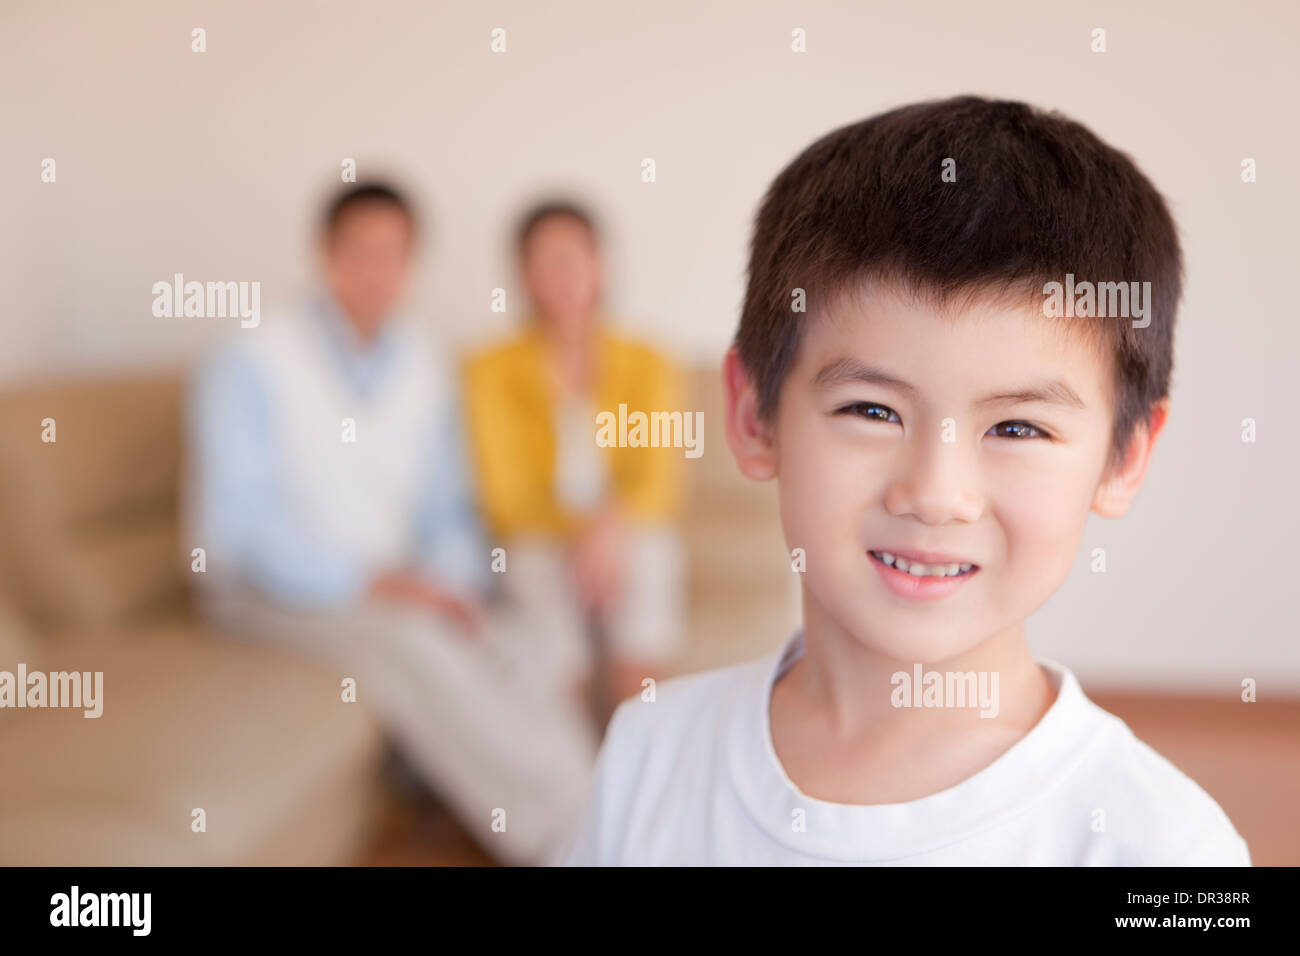 Boy looking at camera, parents in background Stock Photo